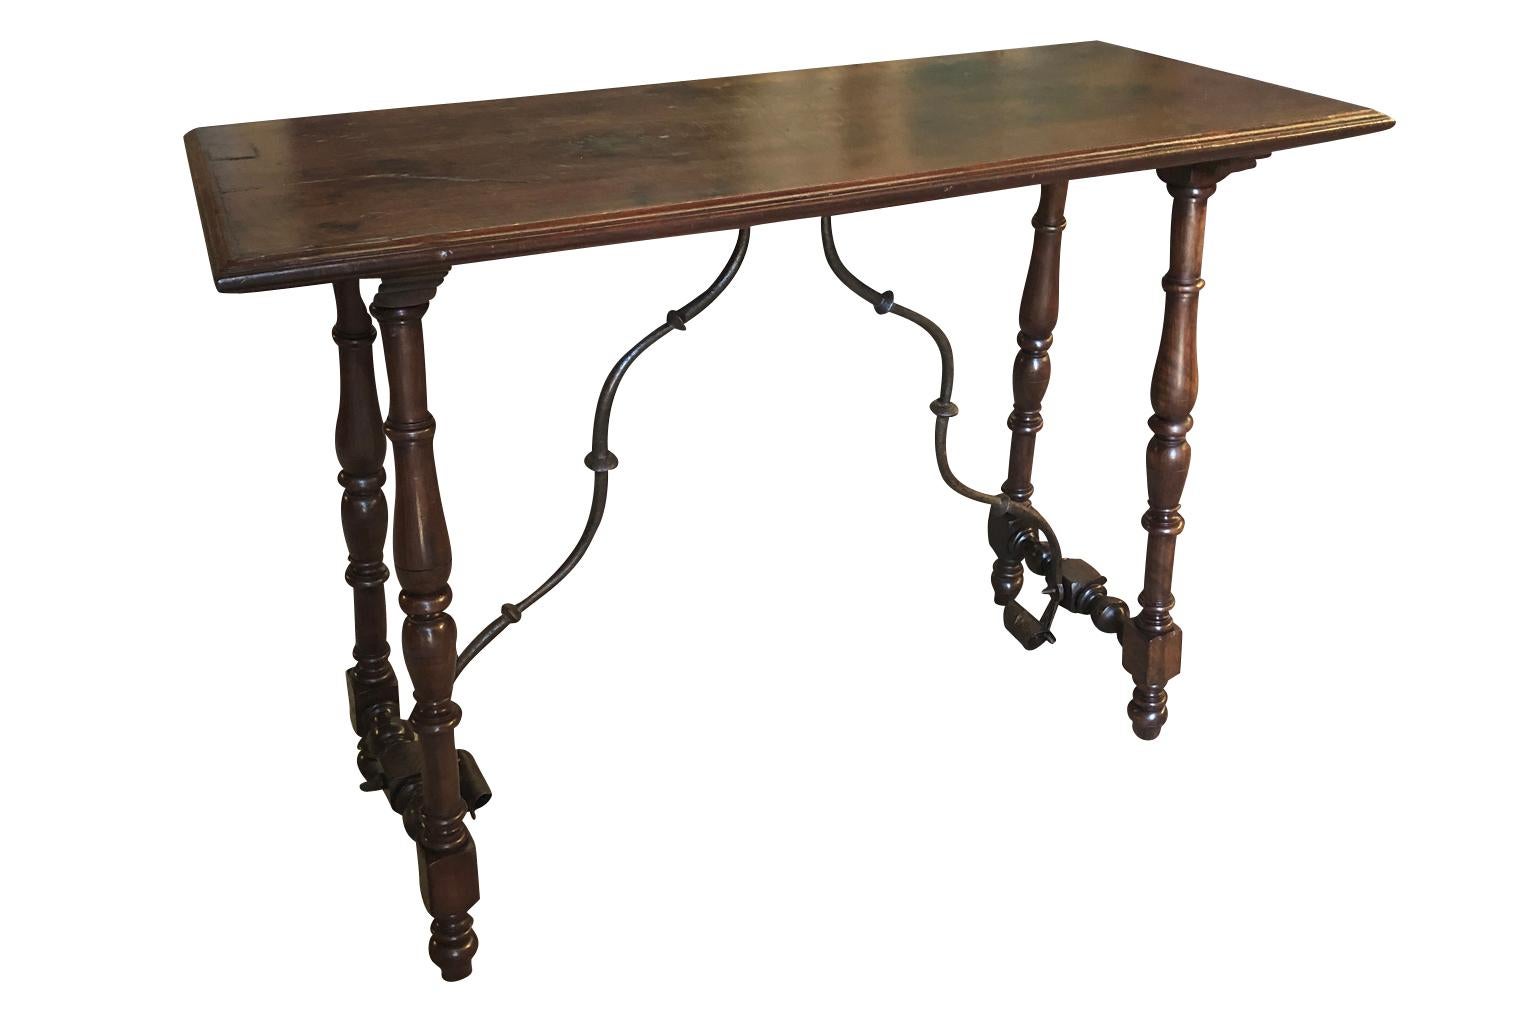 A very charming early 19th century console table from the Catalan region of Spain. Beautifully constructed from stunning walnut and hand forged iron stretchers. Terrific patina.